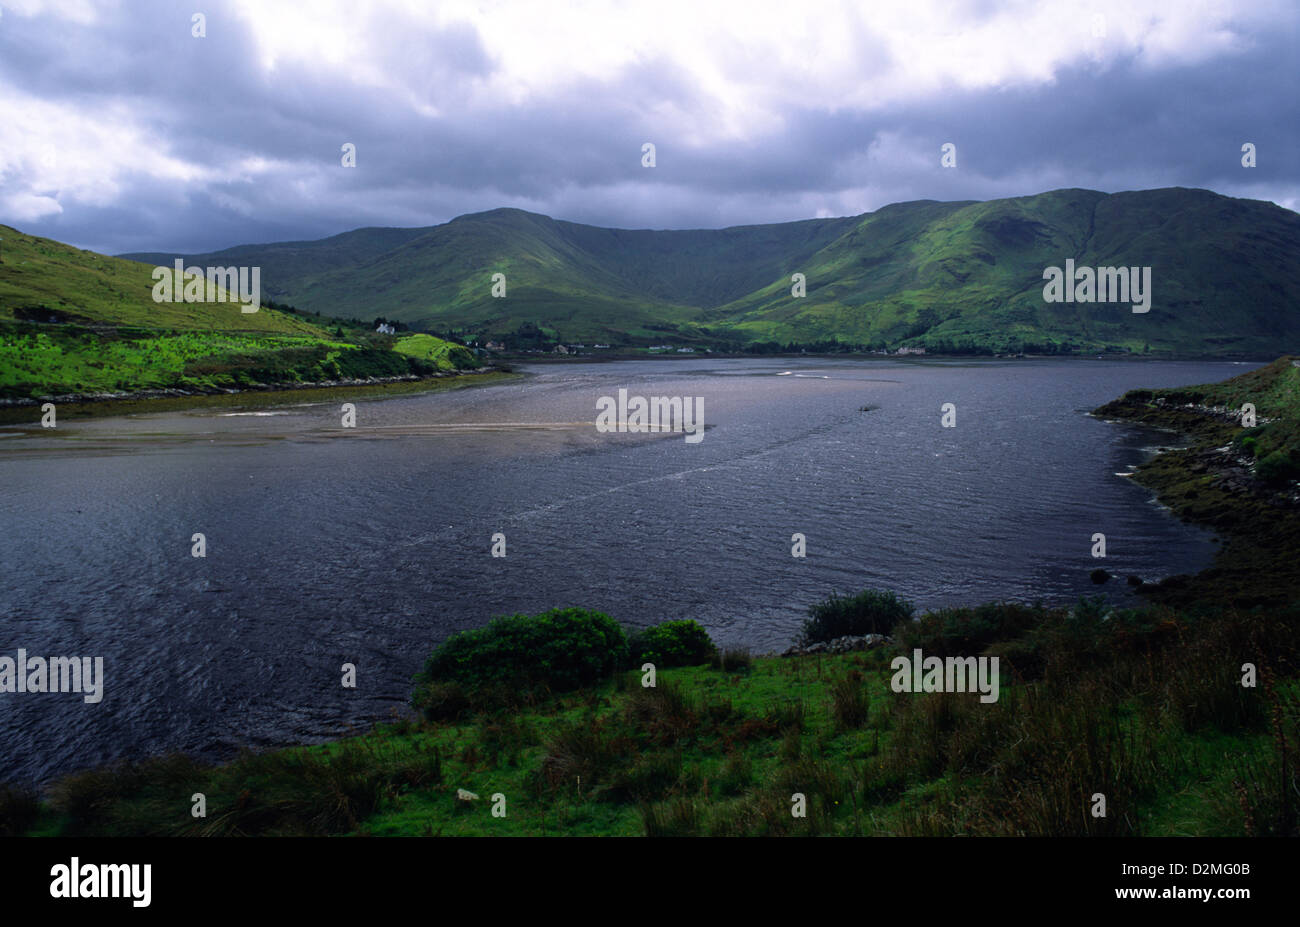 Killary Harbour near Leenane, County Galway, Ireland. Described as Ireland's only 'fjord' it is 16kms in length. Stock Photo